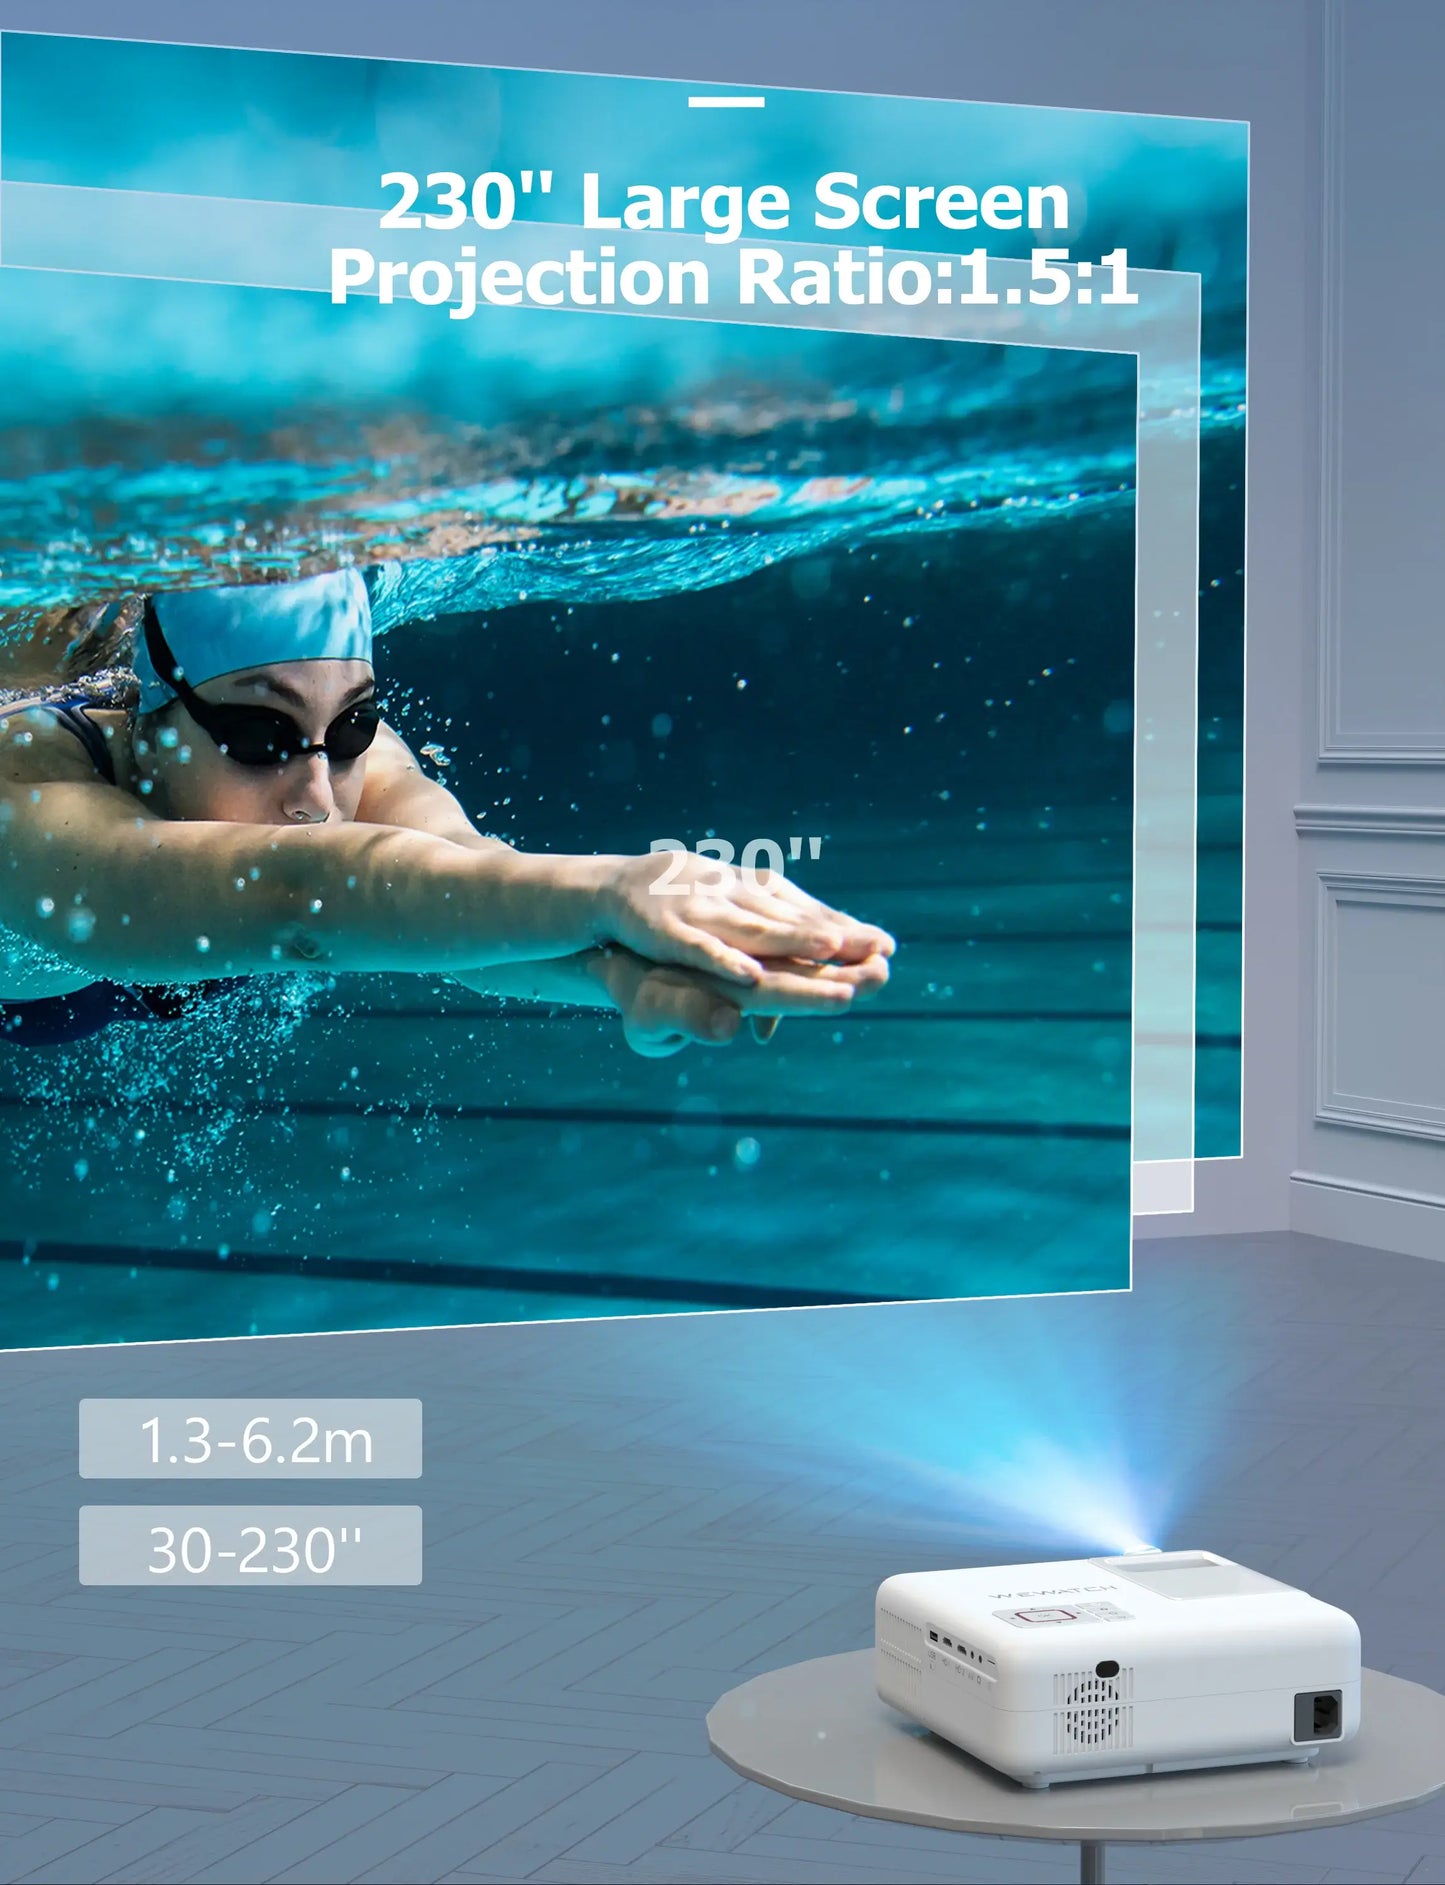 Buy1Get1: WEWATCH V53S Projector: 350 ANSI, 1080P Native, 4K Support, WiFi-6, Bluetooth 5.0